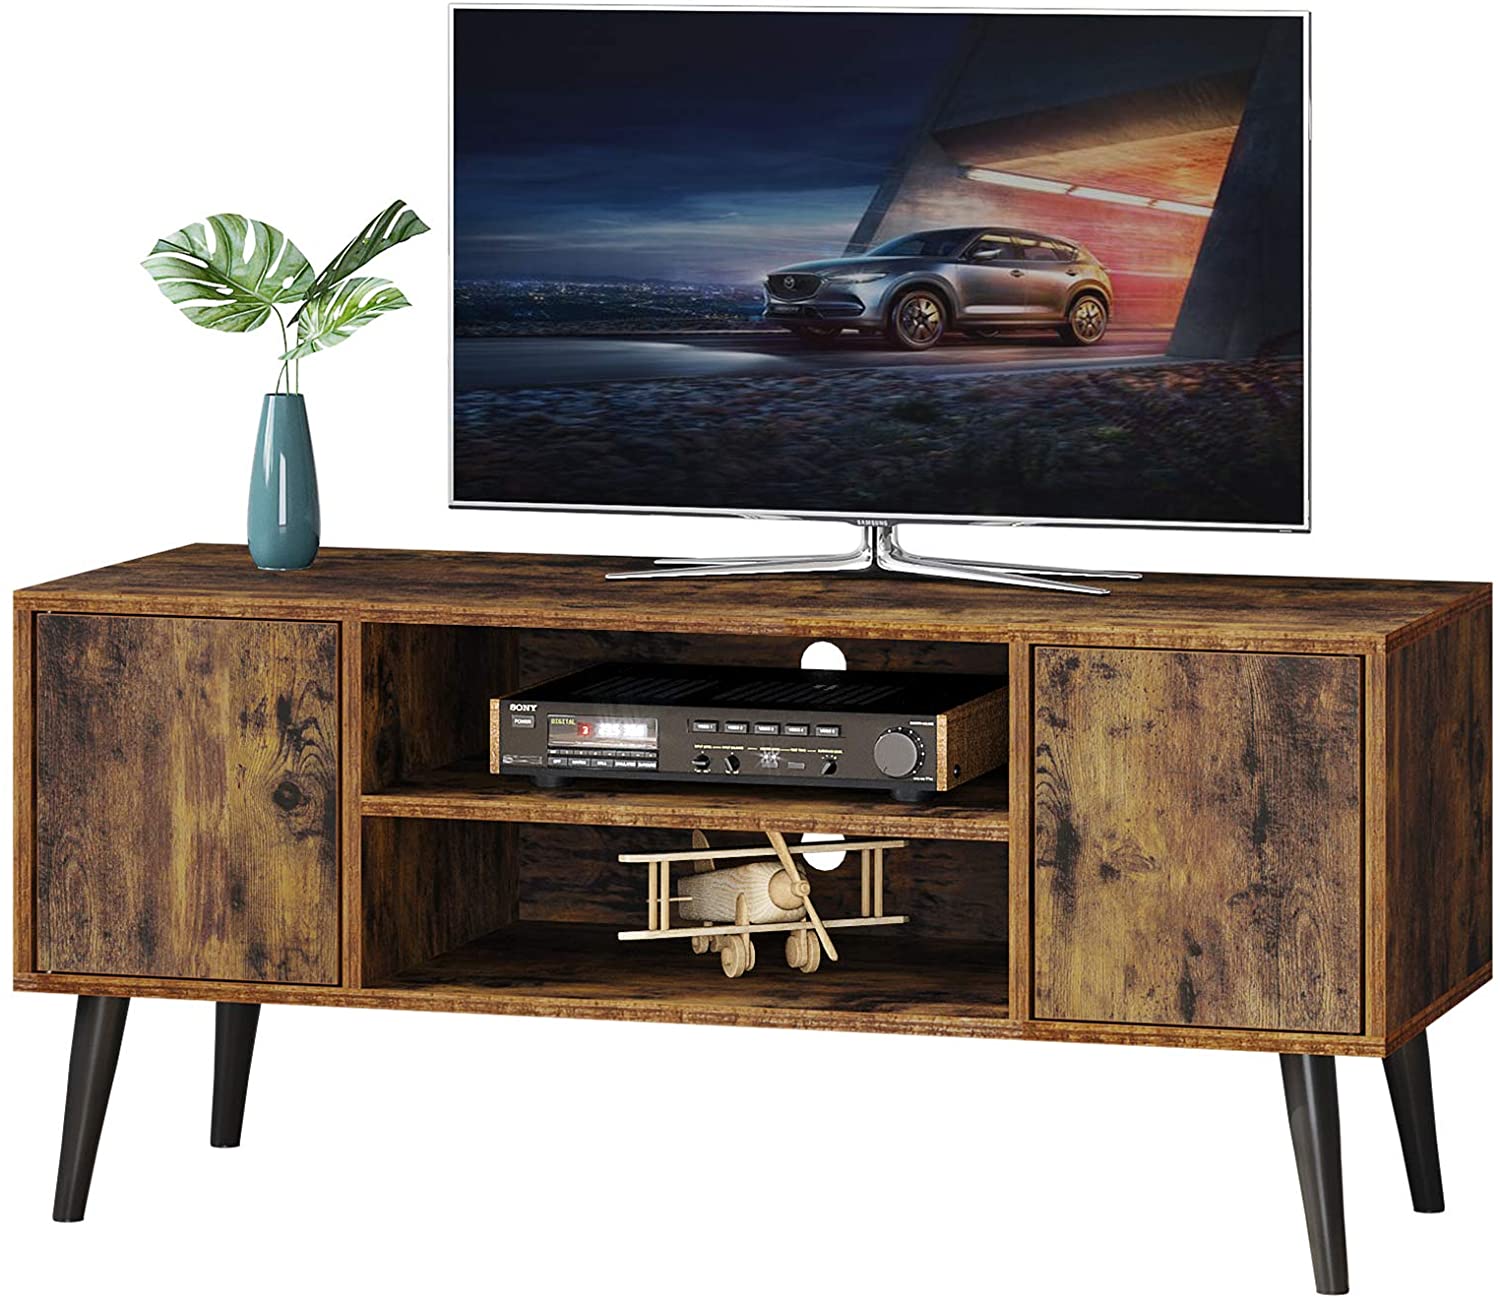 Cheap Mid-century Modern Entertainment Center Retro Flat Screen Tv Cable Box Gaming Console Tv Stand